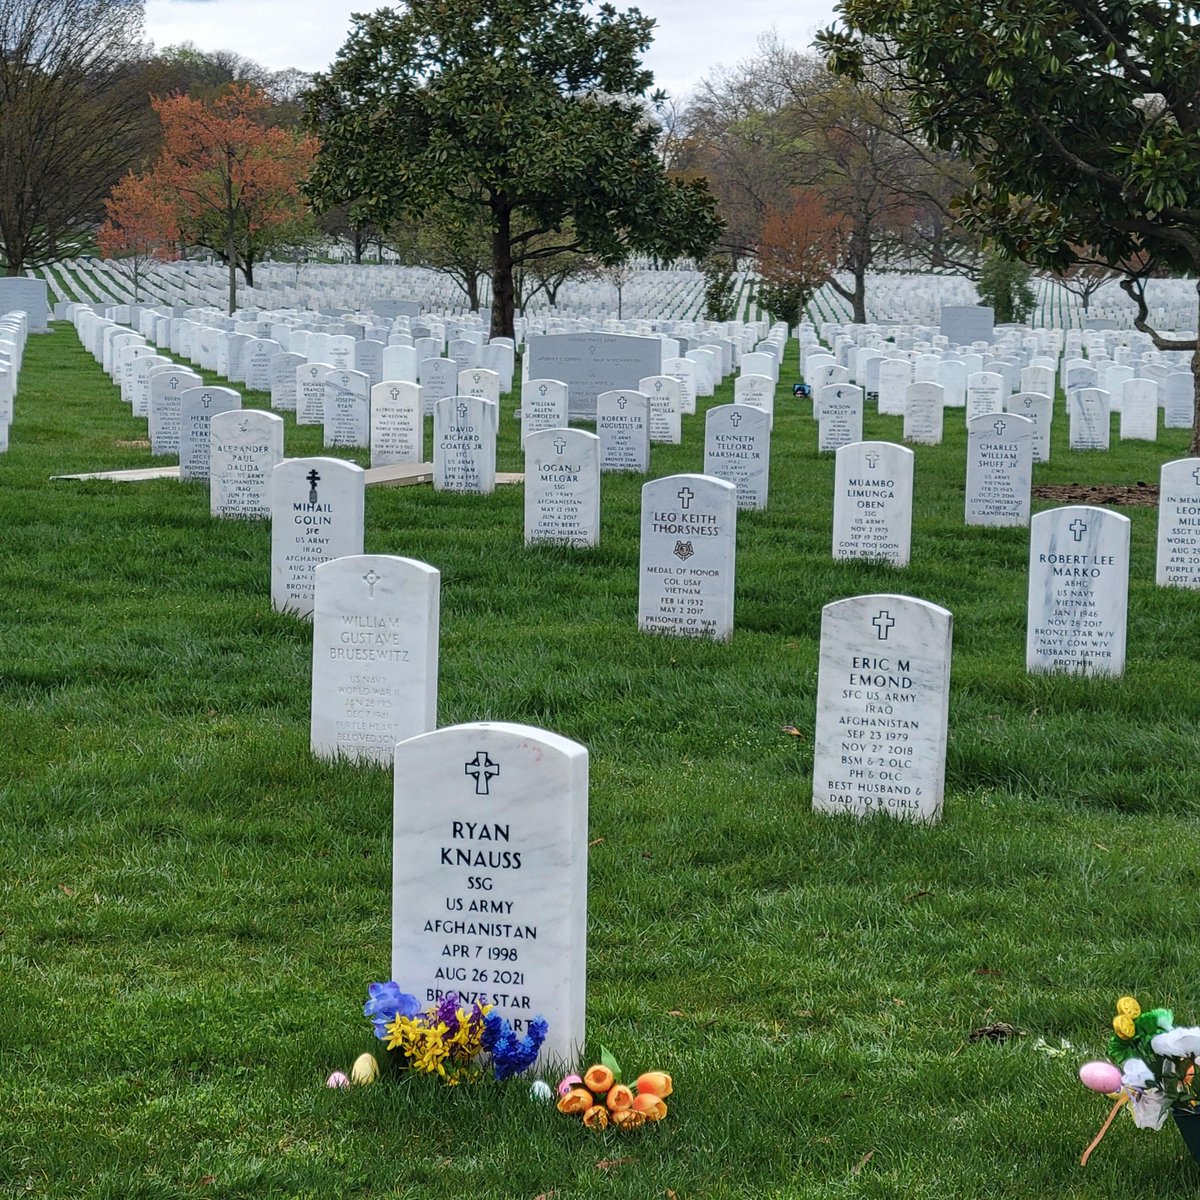 Recently, the GoVA team had the honor of visiting Arlington National Cemetery to pay respects to a fallen soldier who made the ultimate sacrifice in Afghanistan.

Listen to the story here: hubs.li/Q02vYj-S0

#MemorialDayForever #HonorThroughAction #GoVAGivesBack